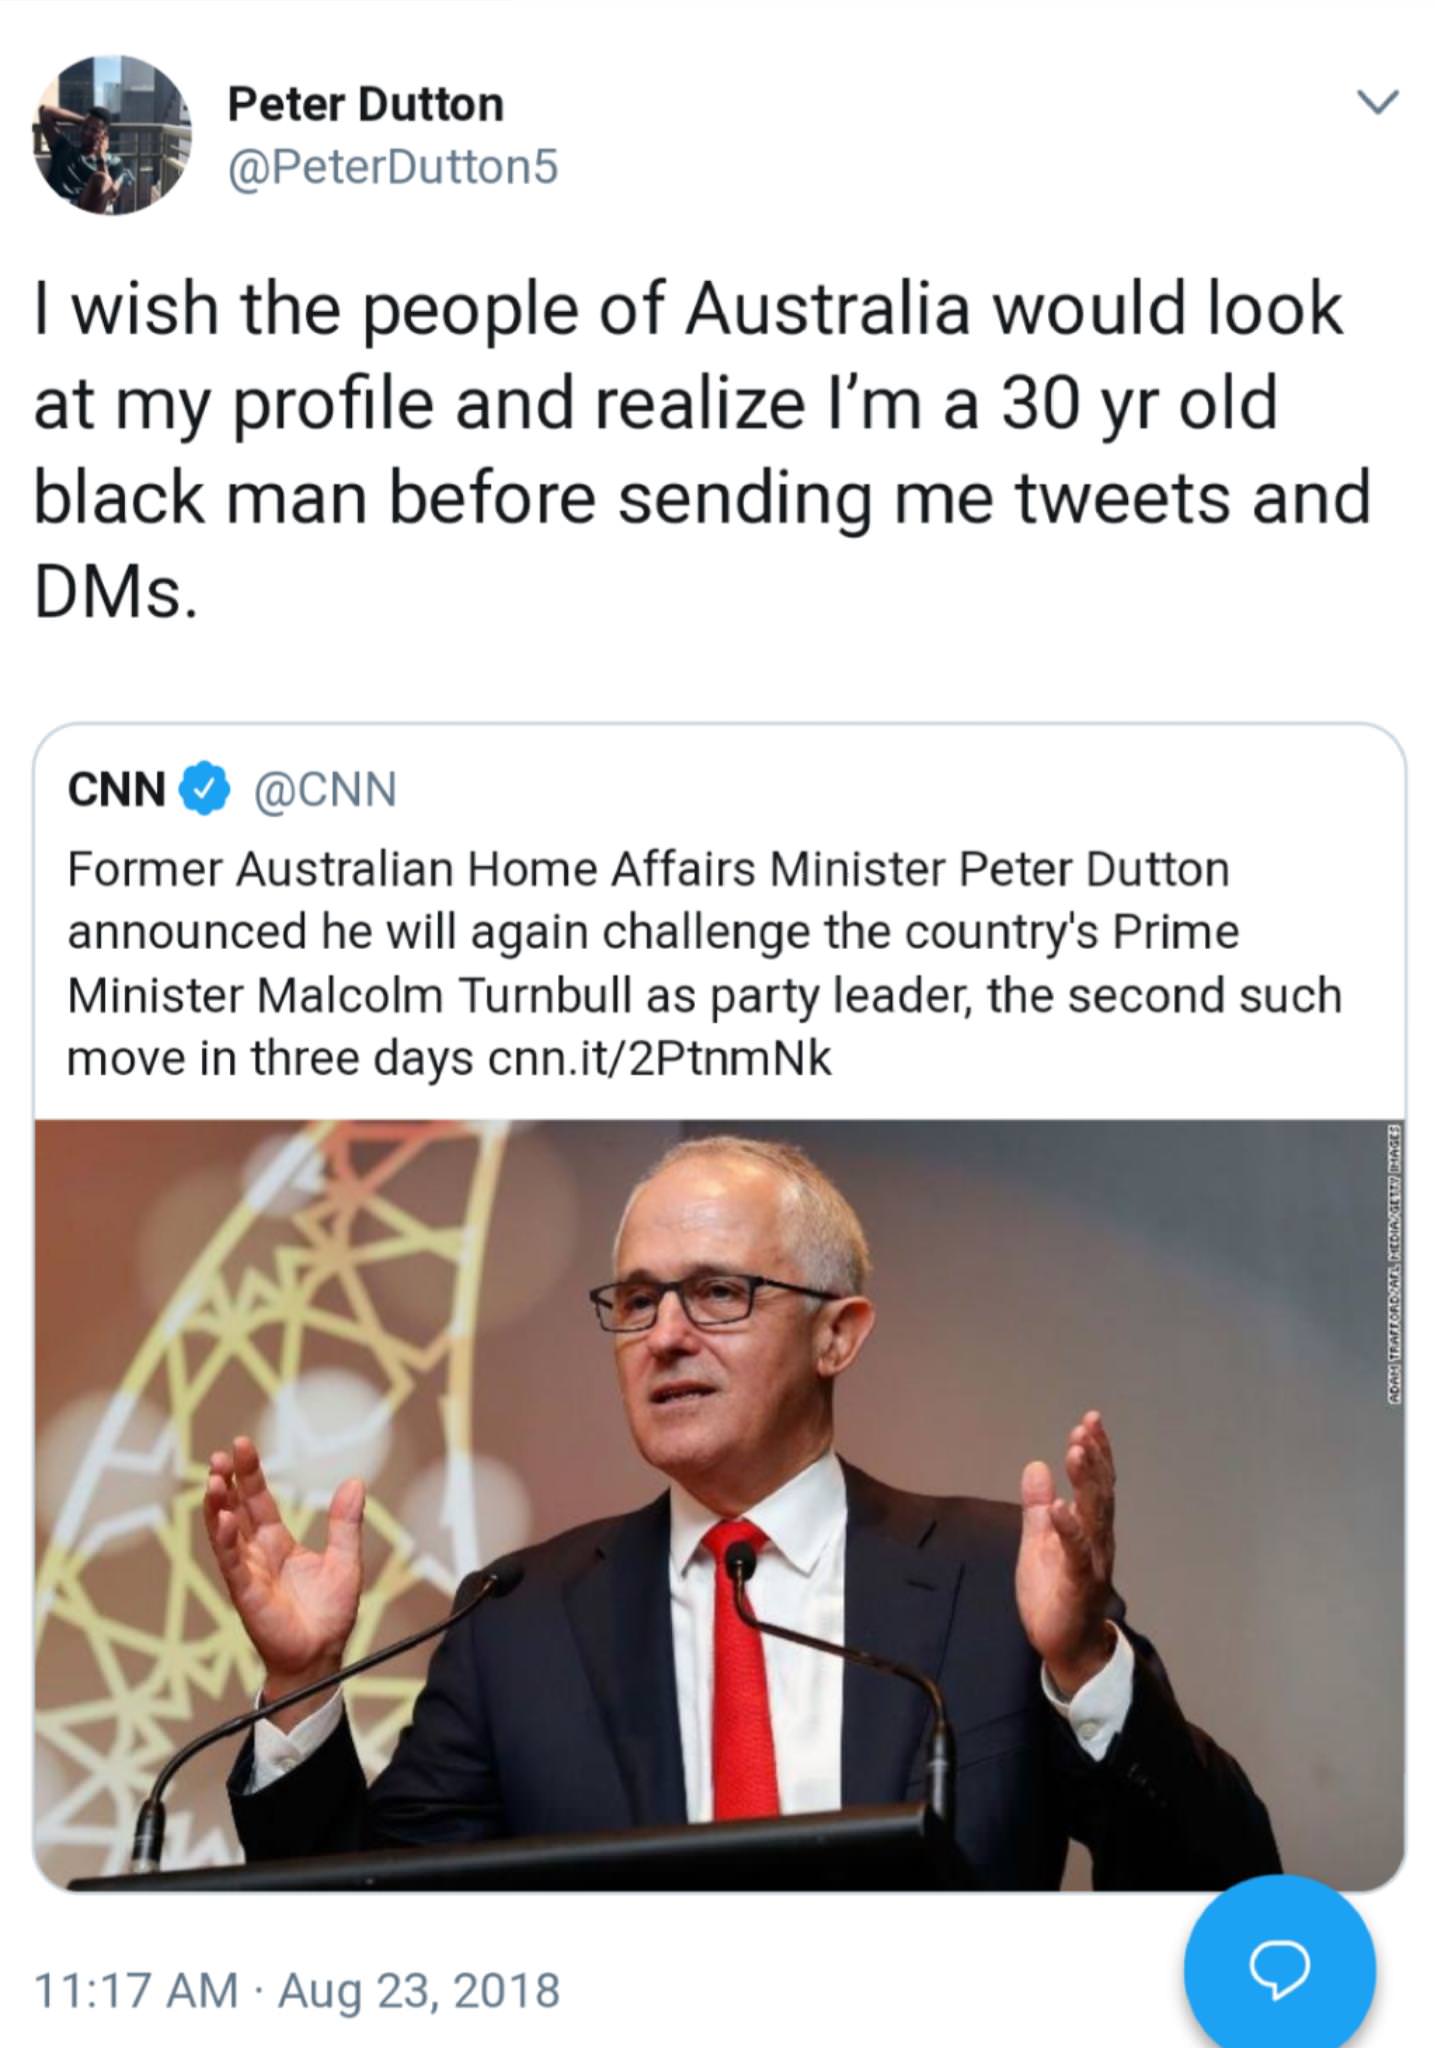 australian prime minister tweets - Peter Dutton I wish the people of Australia would look at my profile and realize I'm a 30 yr old black man before sending me tweets and DMs. Cnn Former Australian Home Affairs Minister Peter Dutton announced he will agai